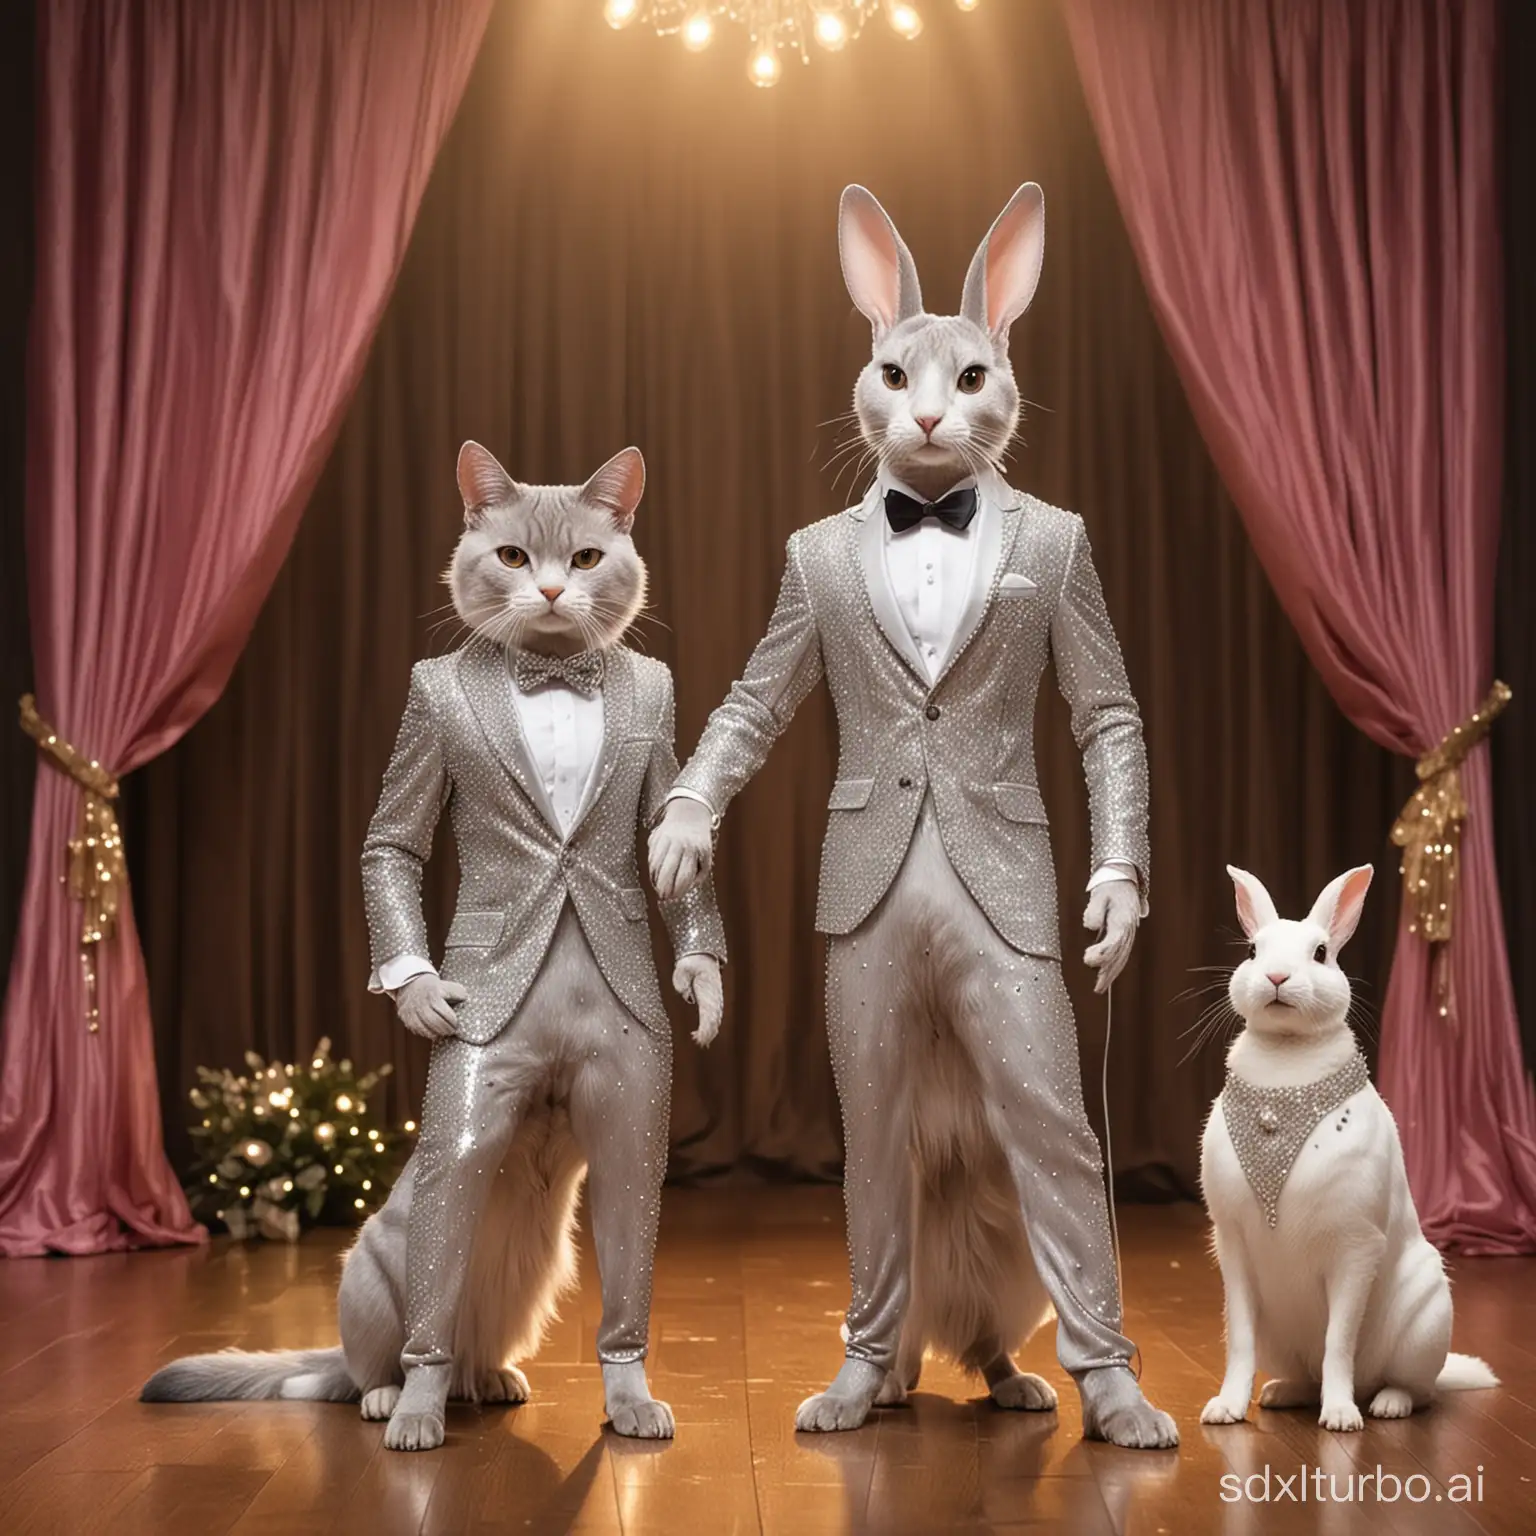 Elegant-Animal-Trio-in-Glamorous-Attire-on-Stage-with-Sparkling-Lights